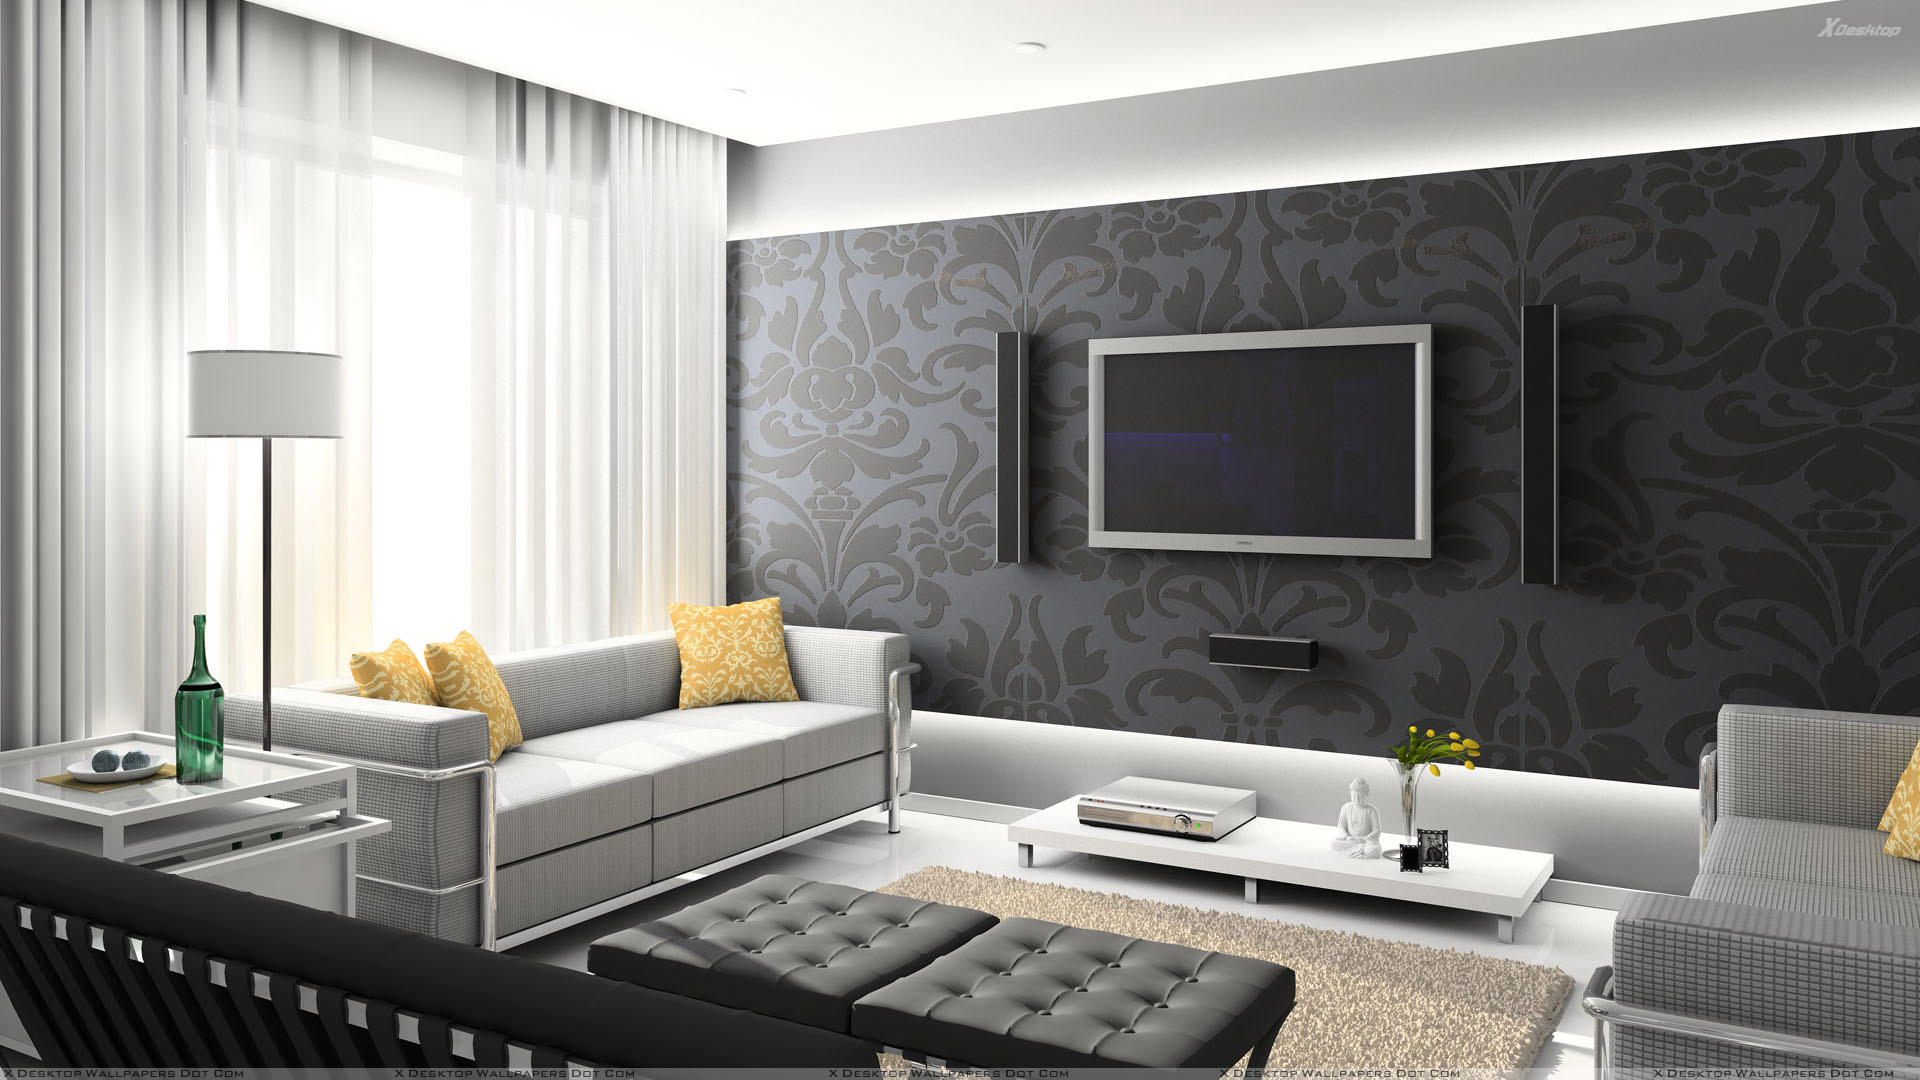 Black Digital Interior And Home Theater Room Wallpaper